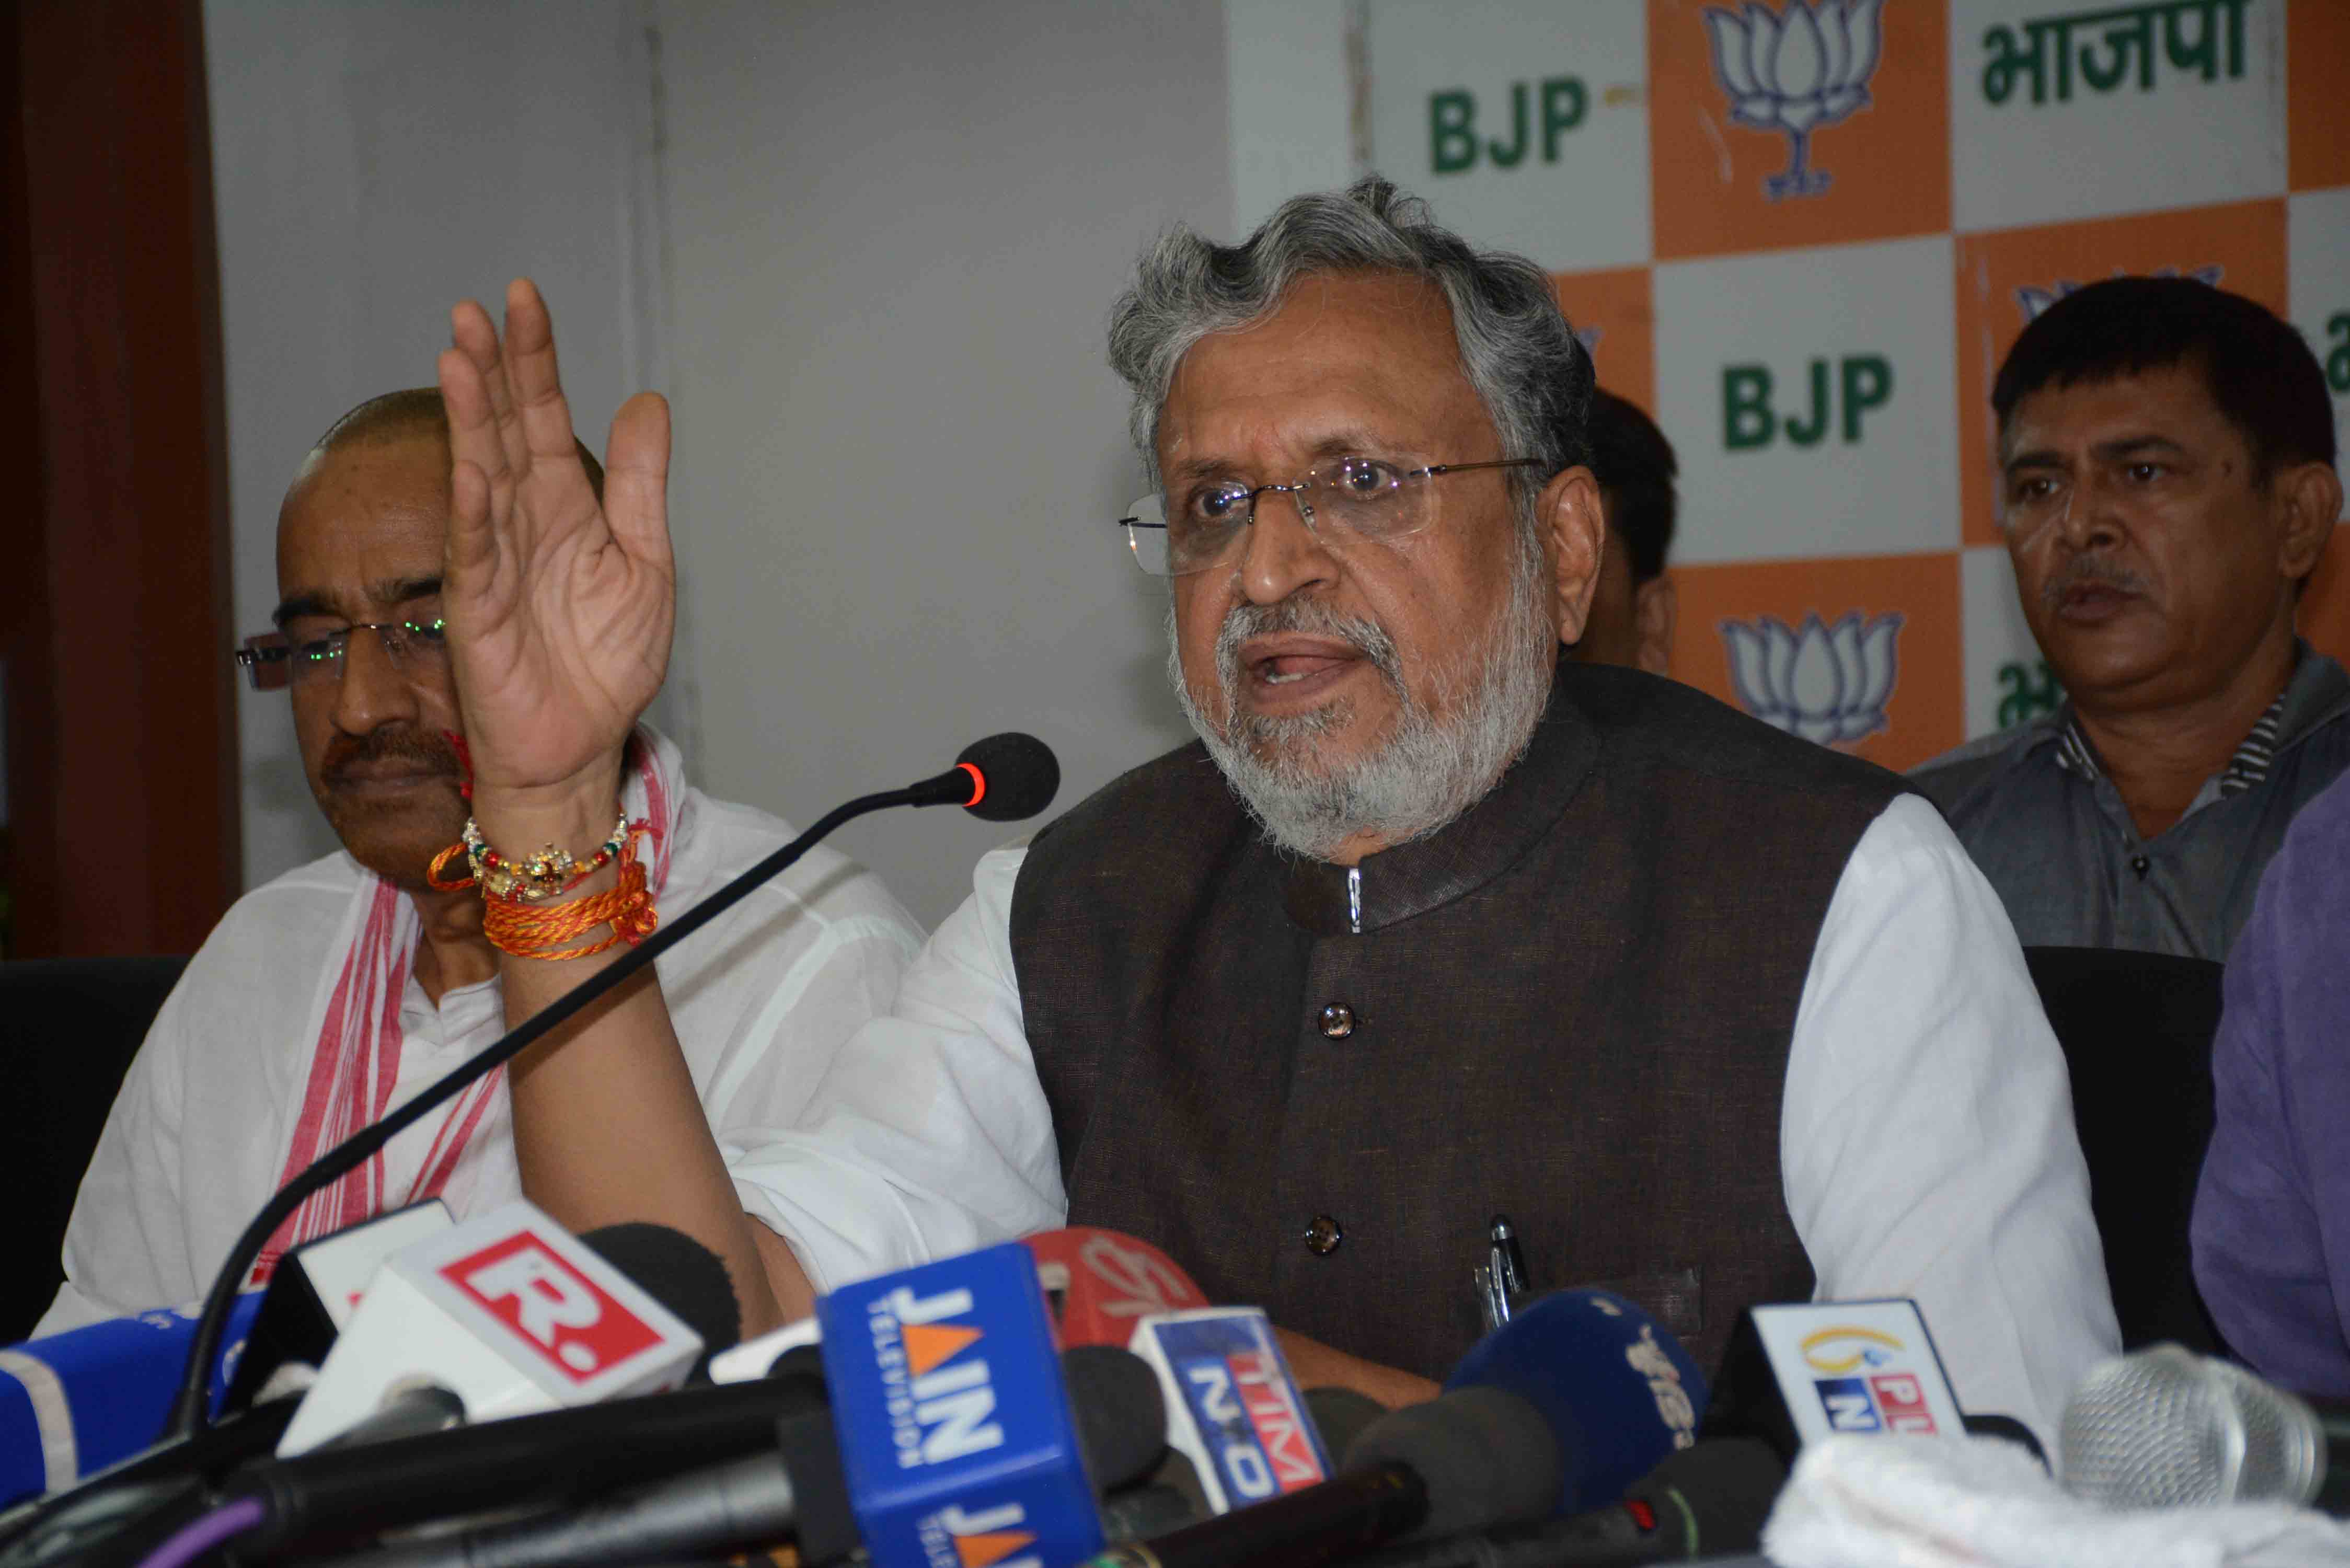 BJP leader Sushil Kumar Modi was in the Opposition when the case was filed.